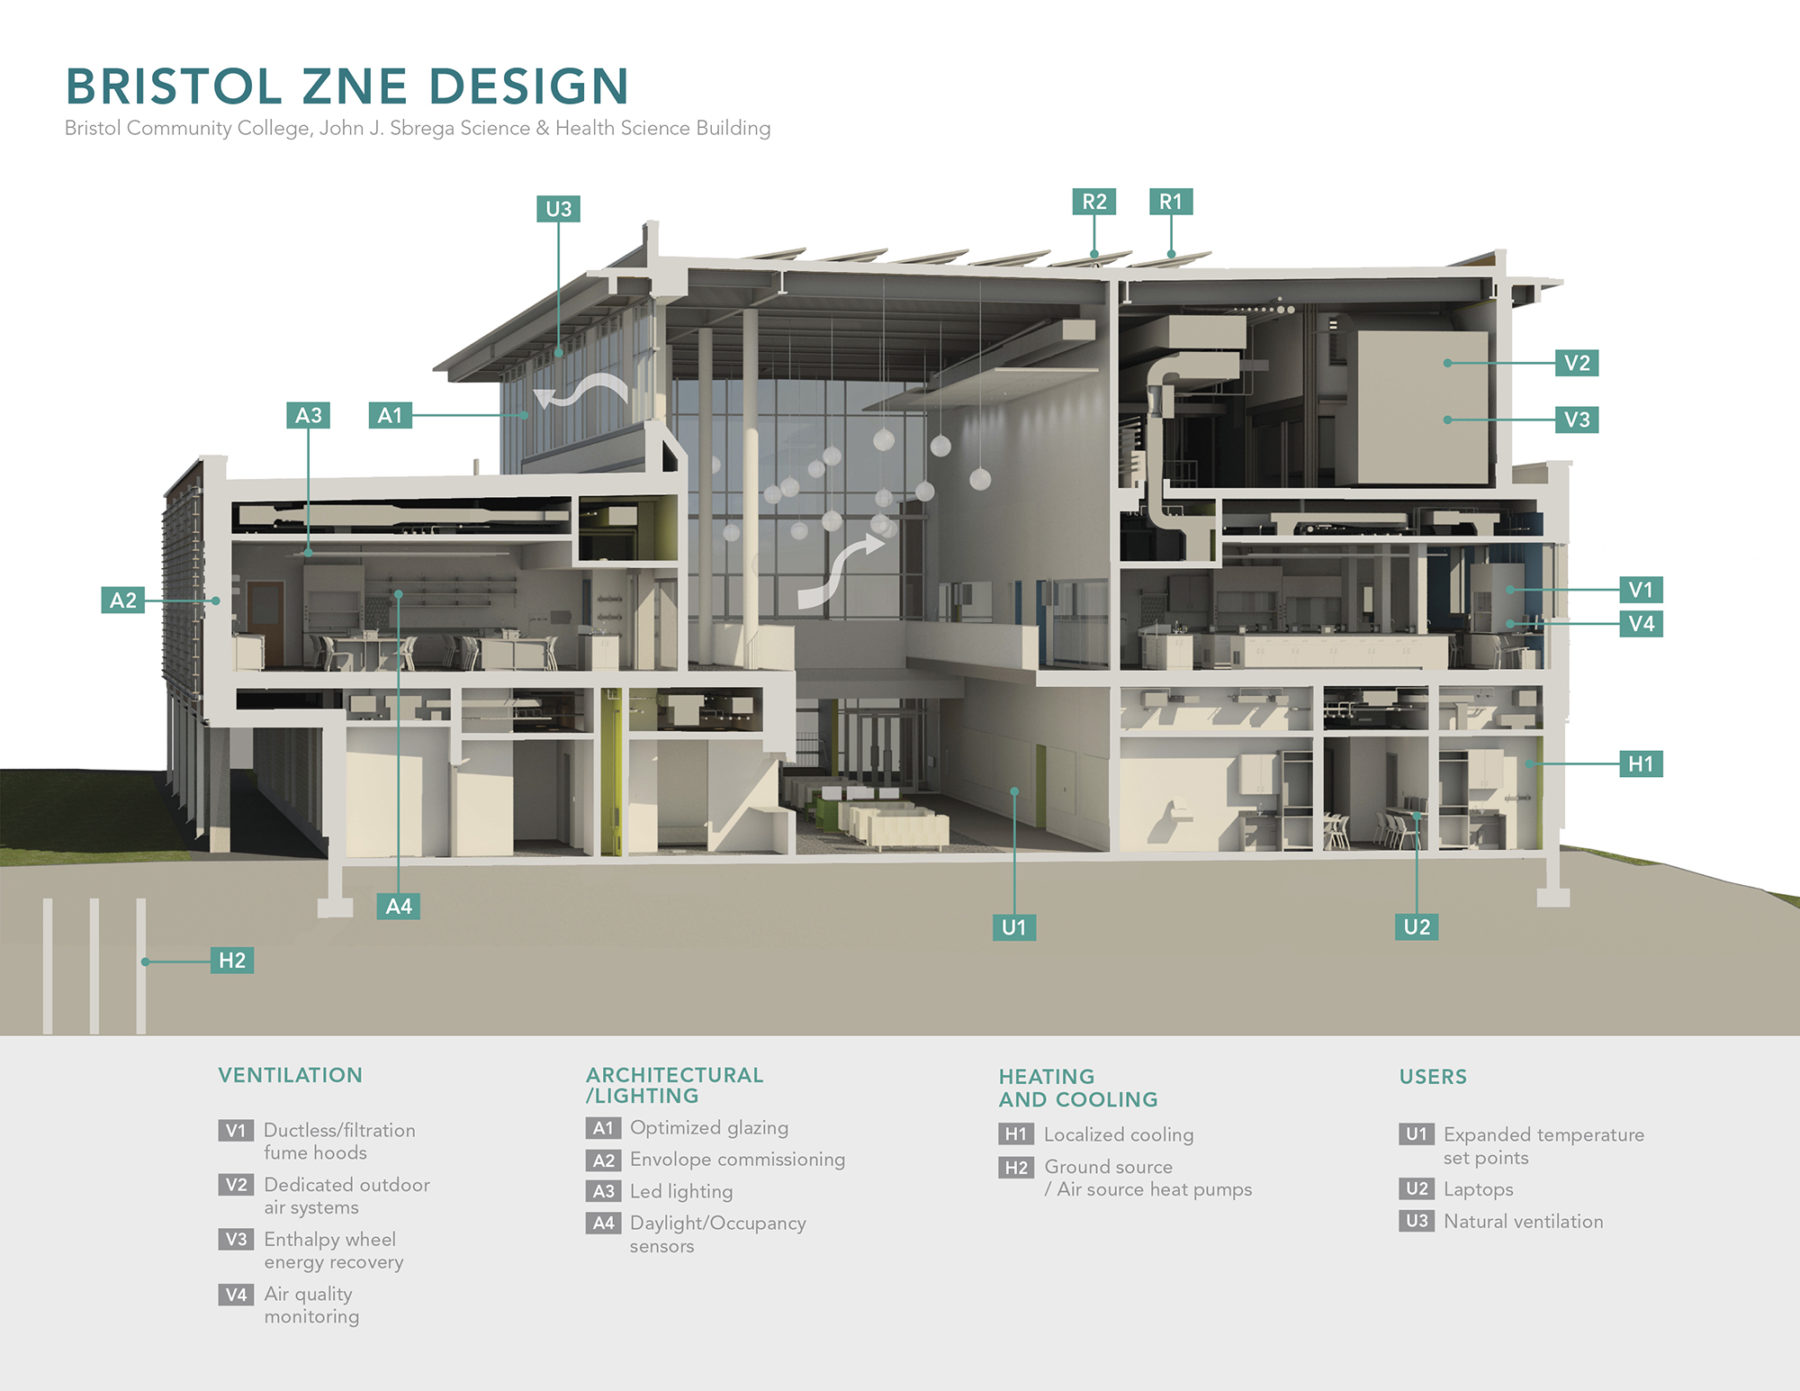 Zone design section